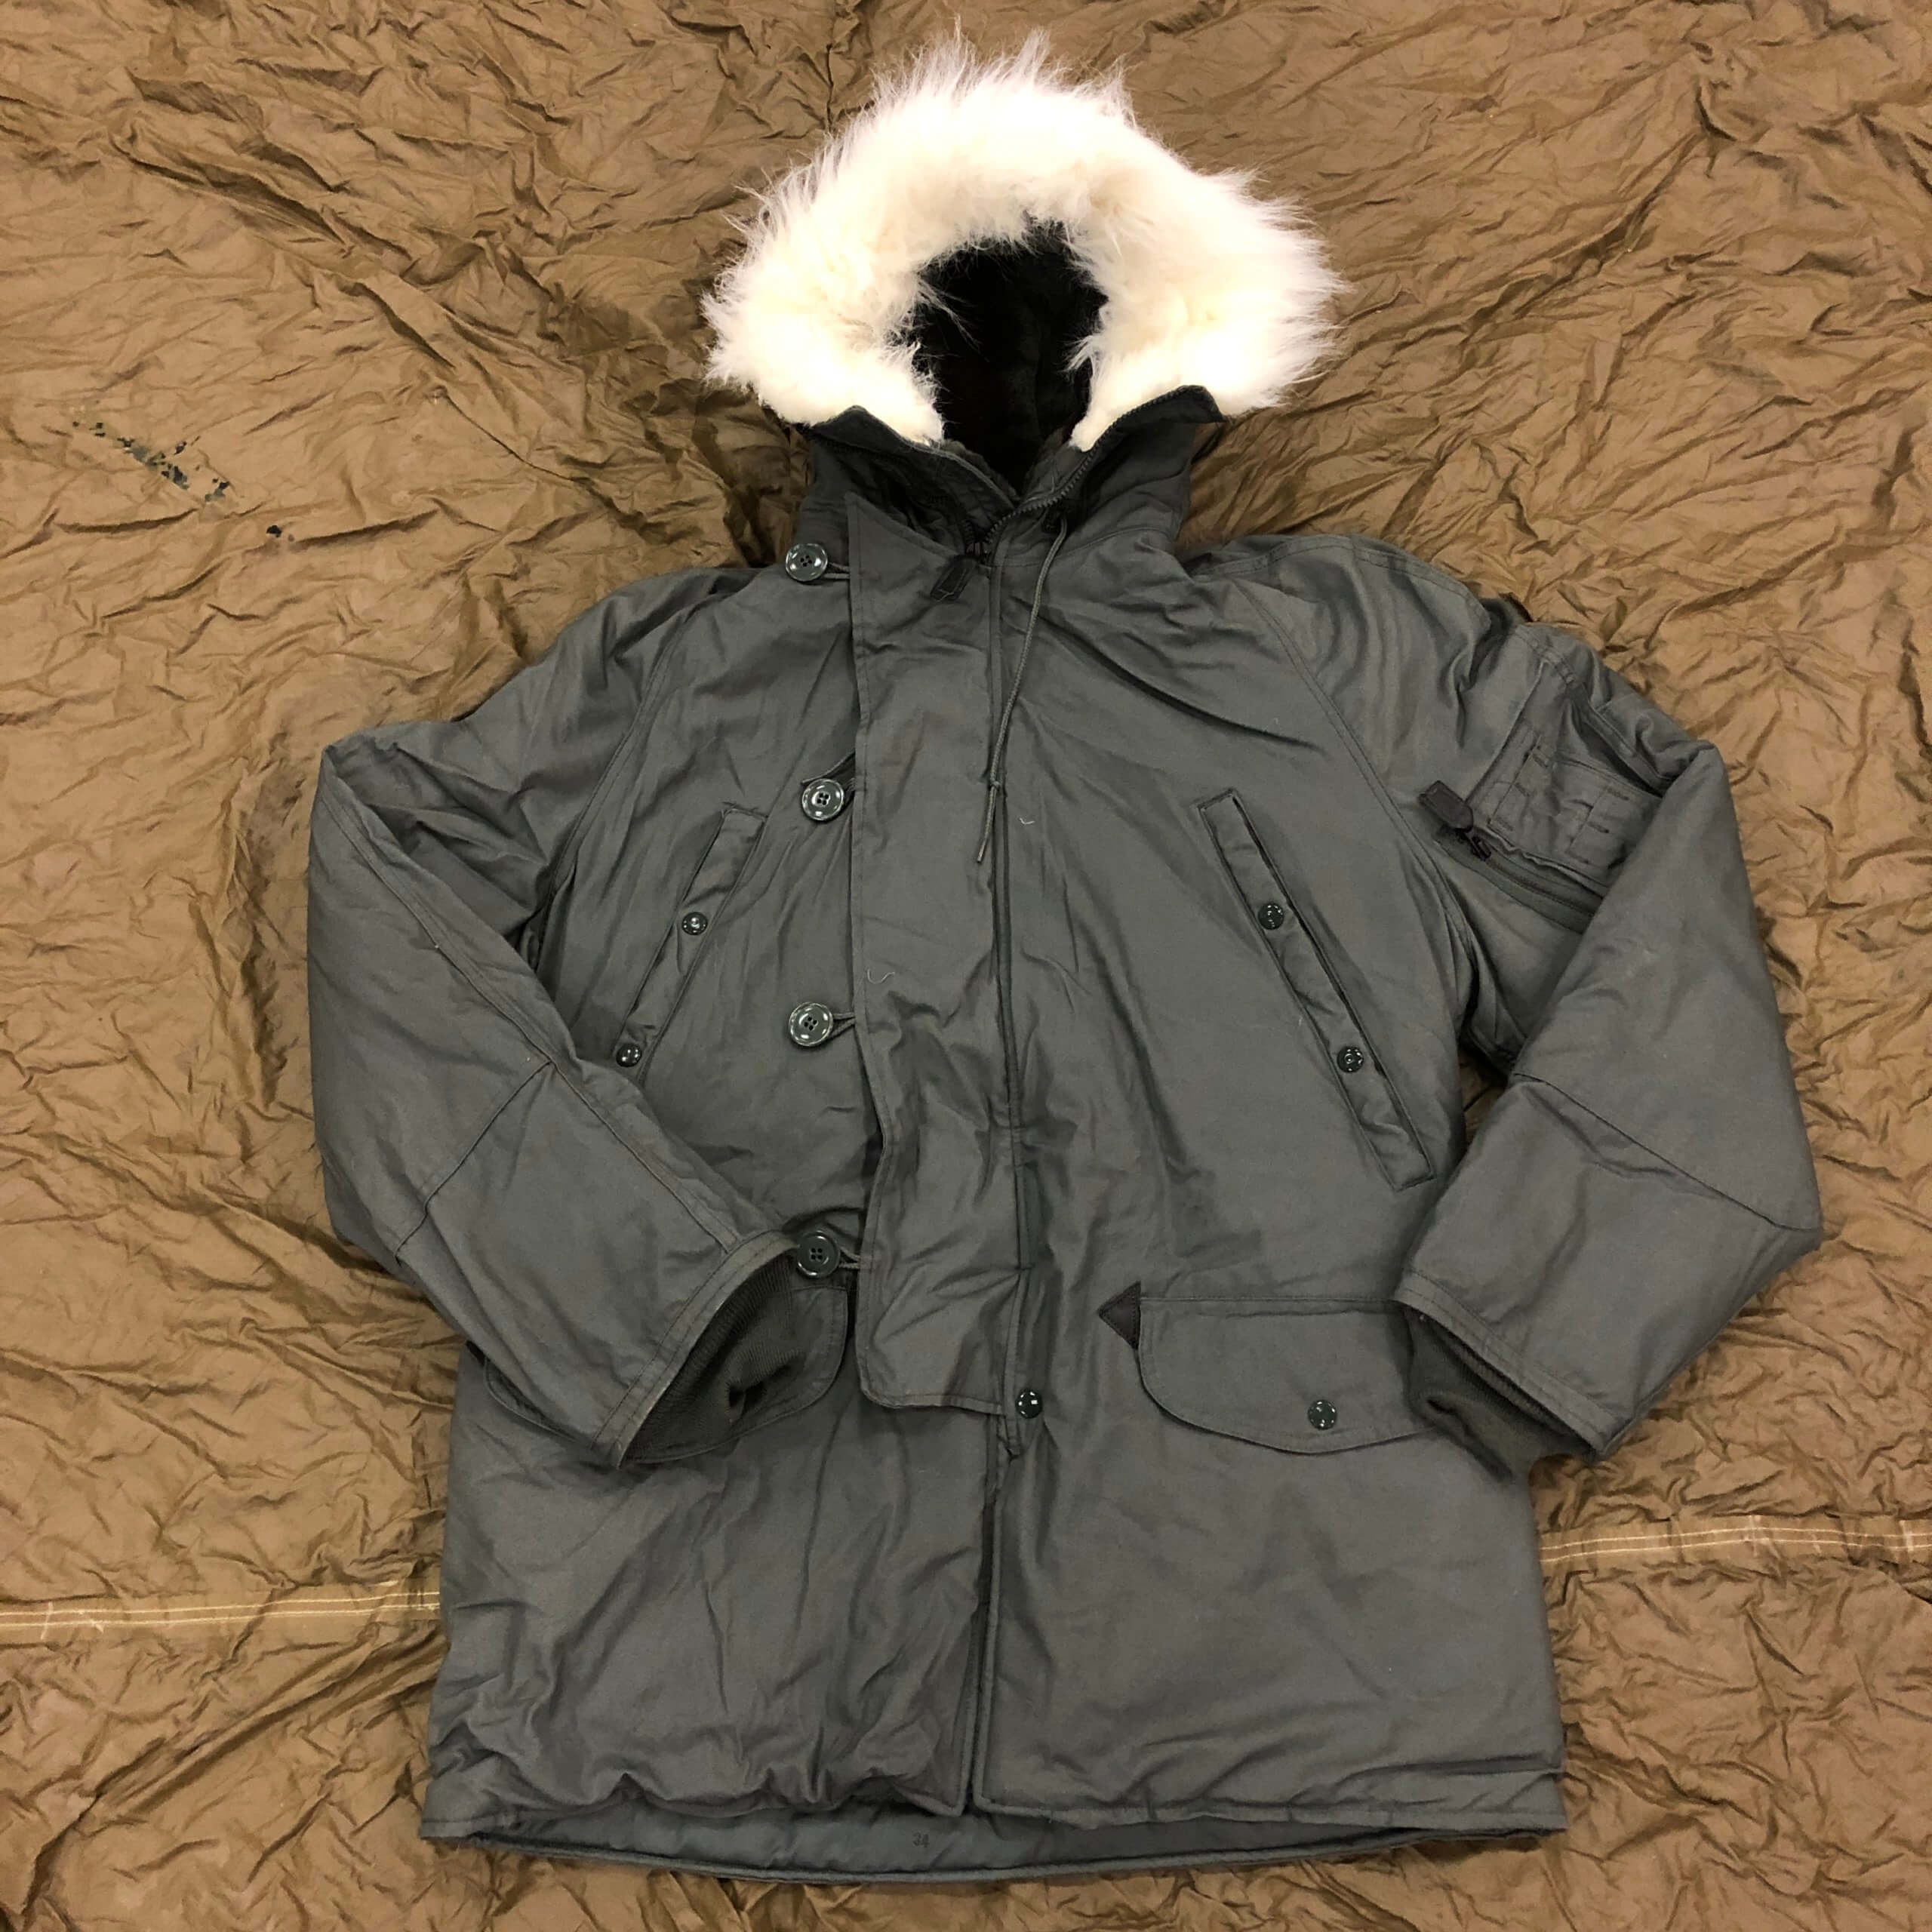 MILITARY/ユーエスミリタリー EXTREME COLD WEATHER N3B PARKA DEAD 